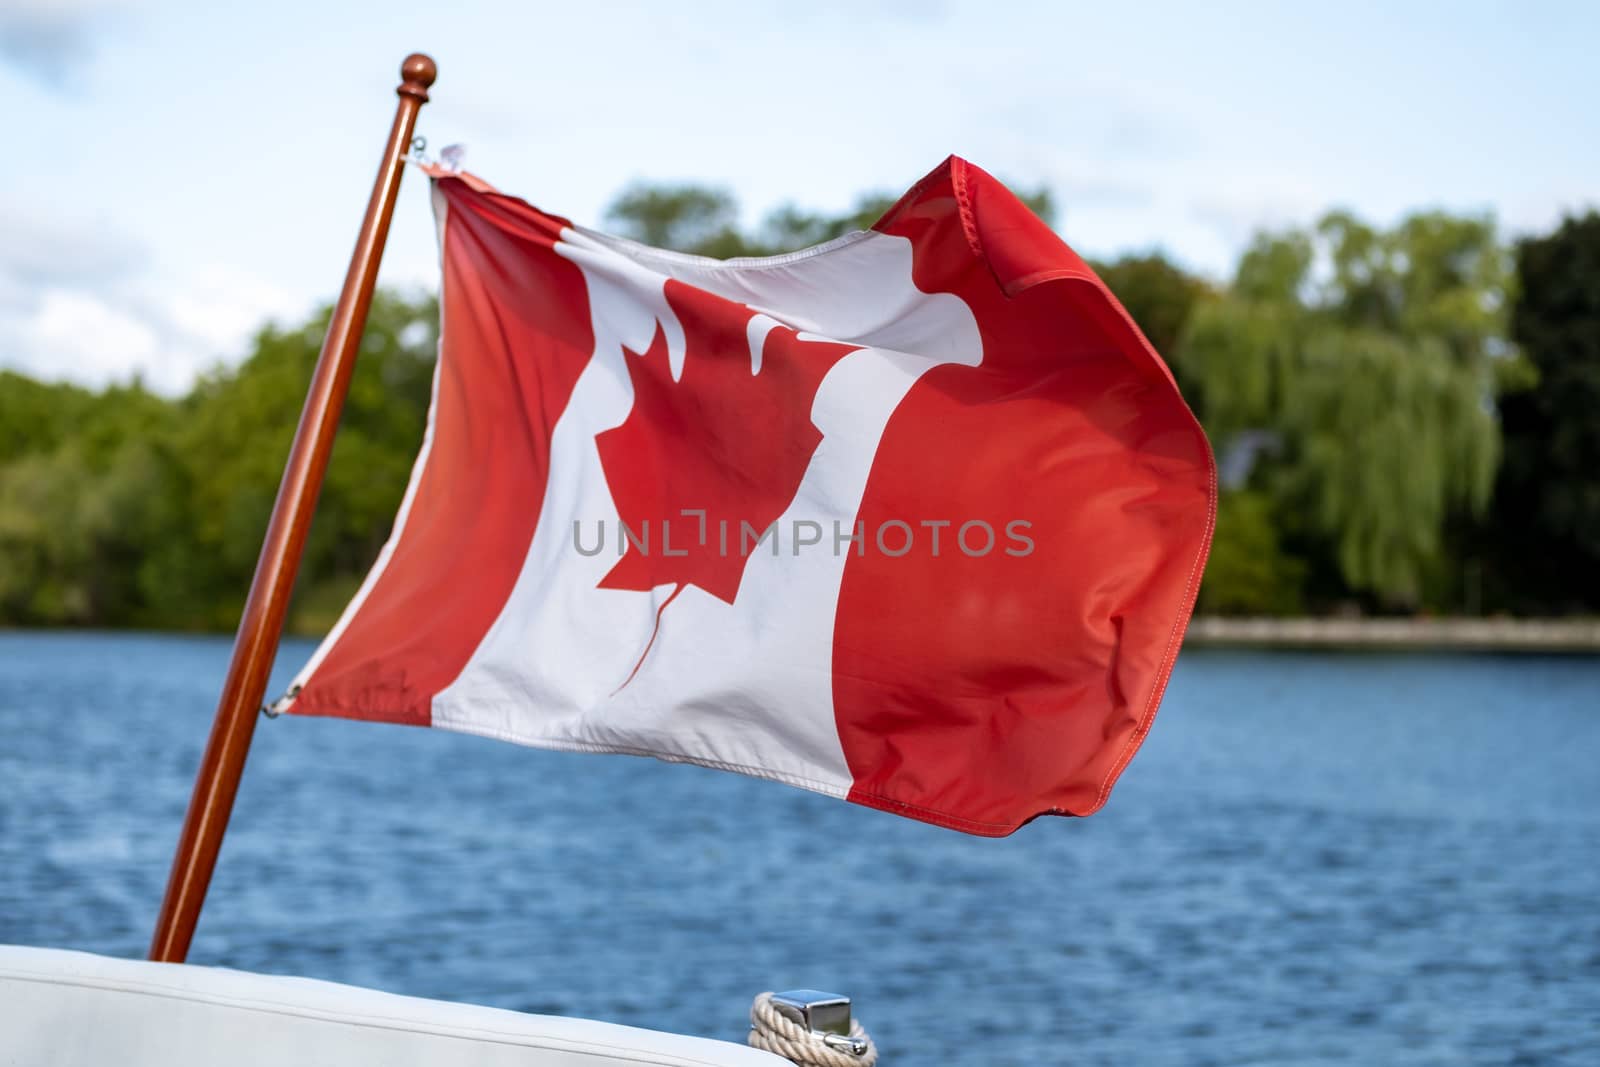 A Canadian flag flies in the wind at the stern, or back, of a small boat. Trees on a free. shore and the blue water of a river are seen behind it.